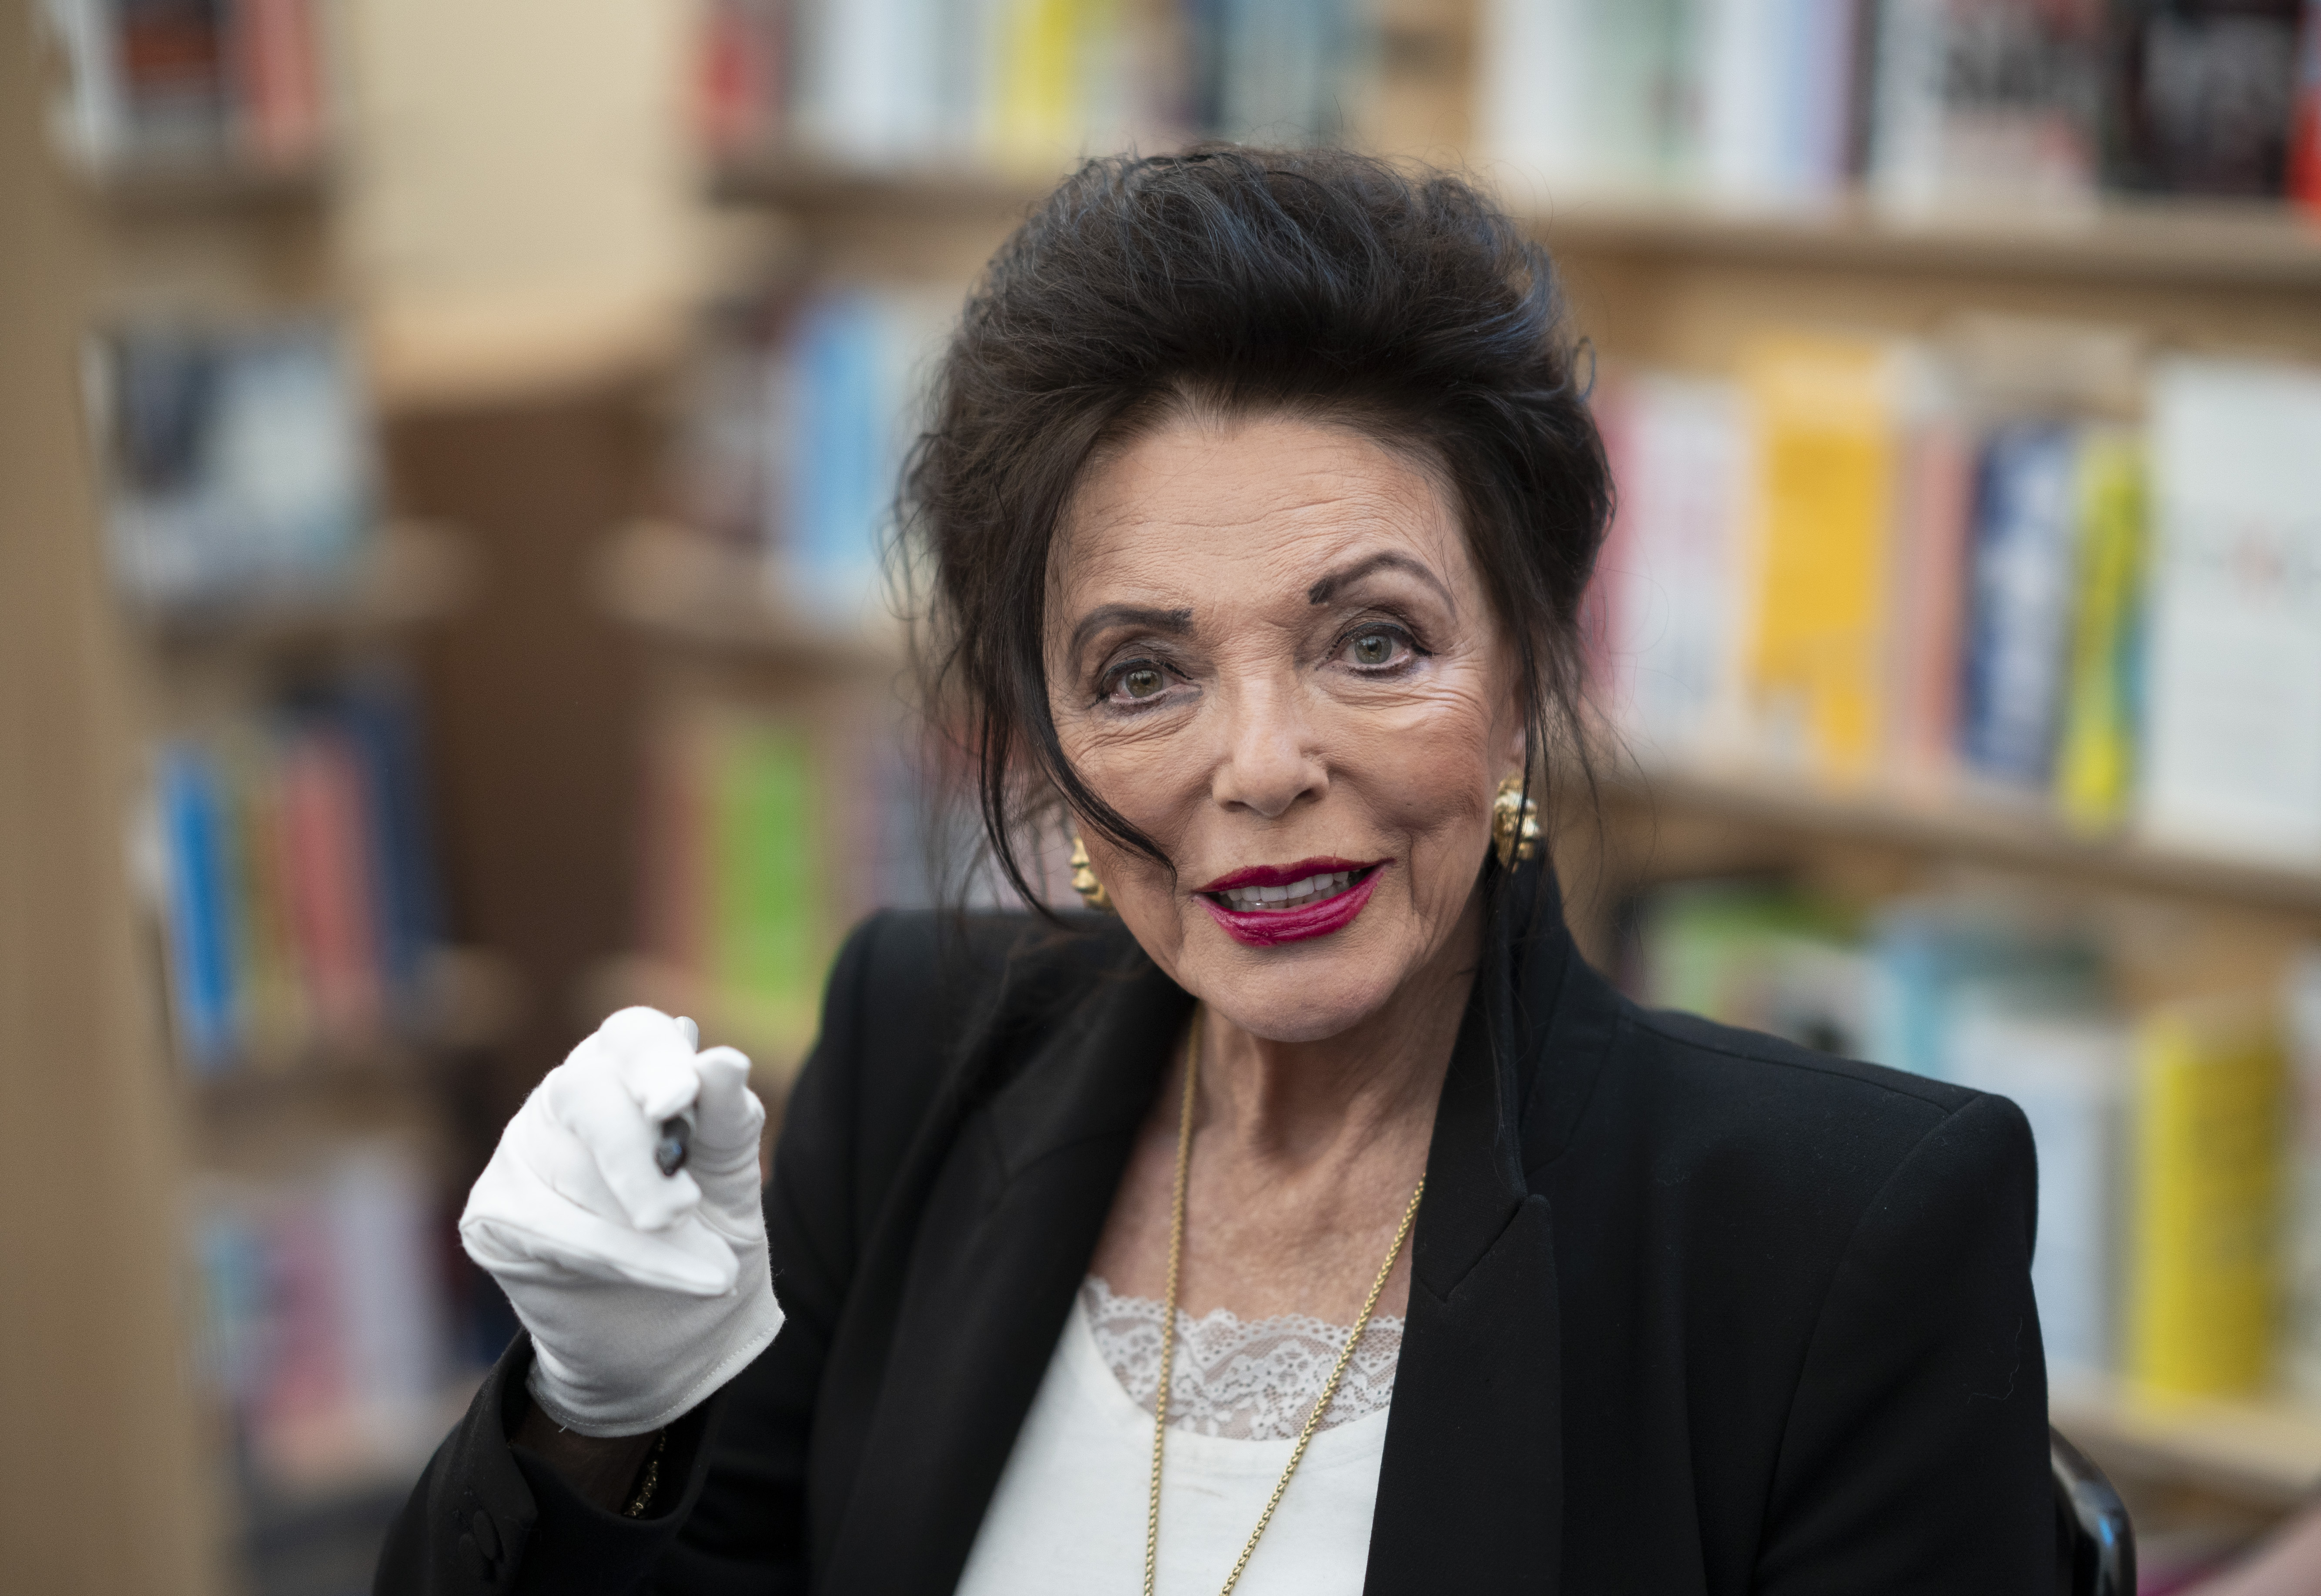 Joan Collins at the Cheltenham Literature Festival on October 16, 2021, in Cheltenham, England | Source: Getty Images